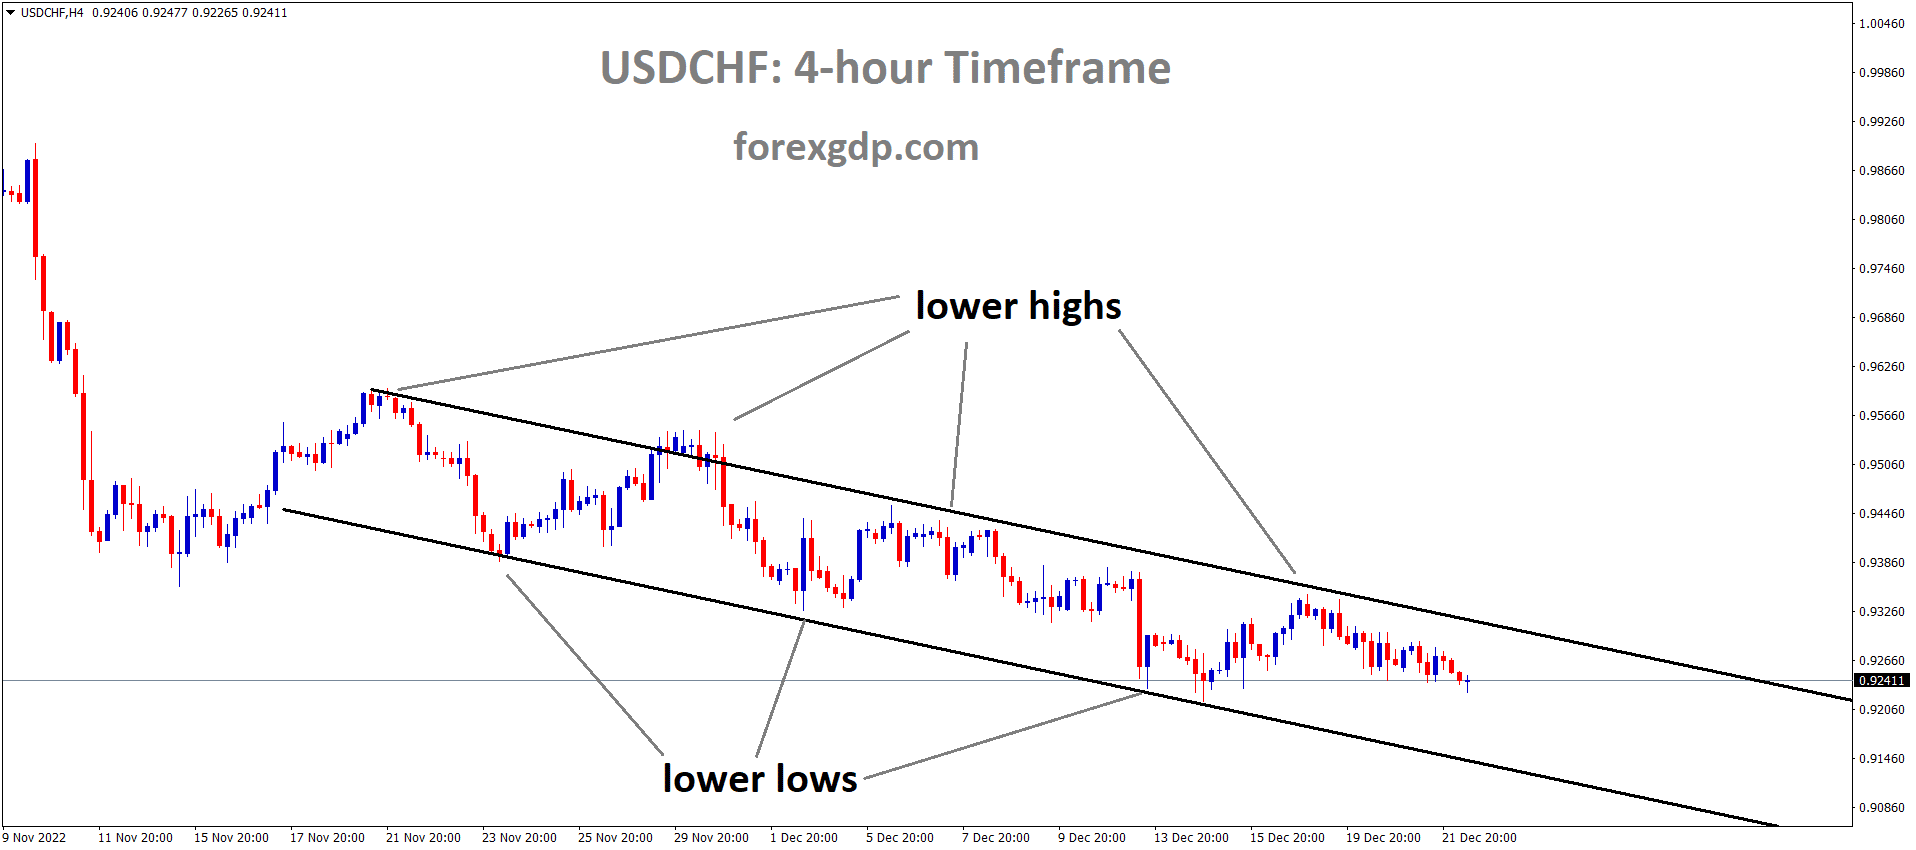 USDCHF is moving in the Descending channel and the market has fallen from the lower high area of the channel 4